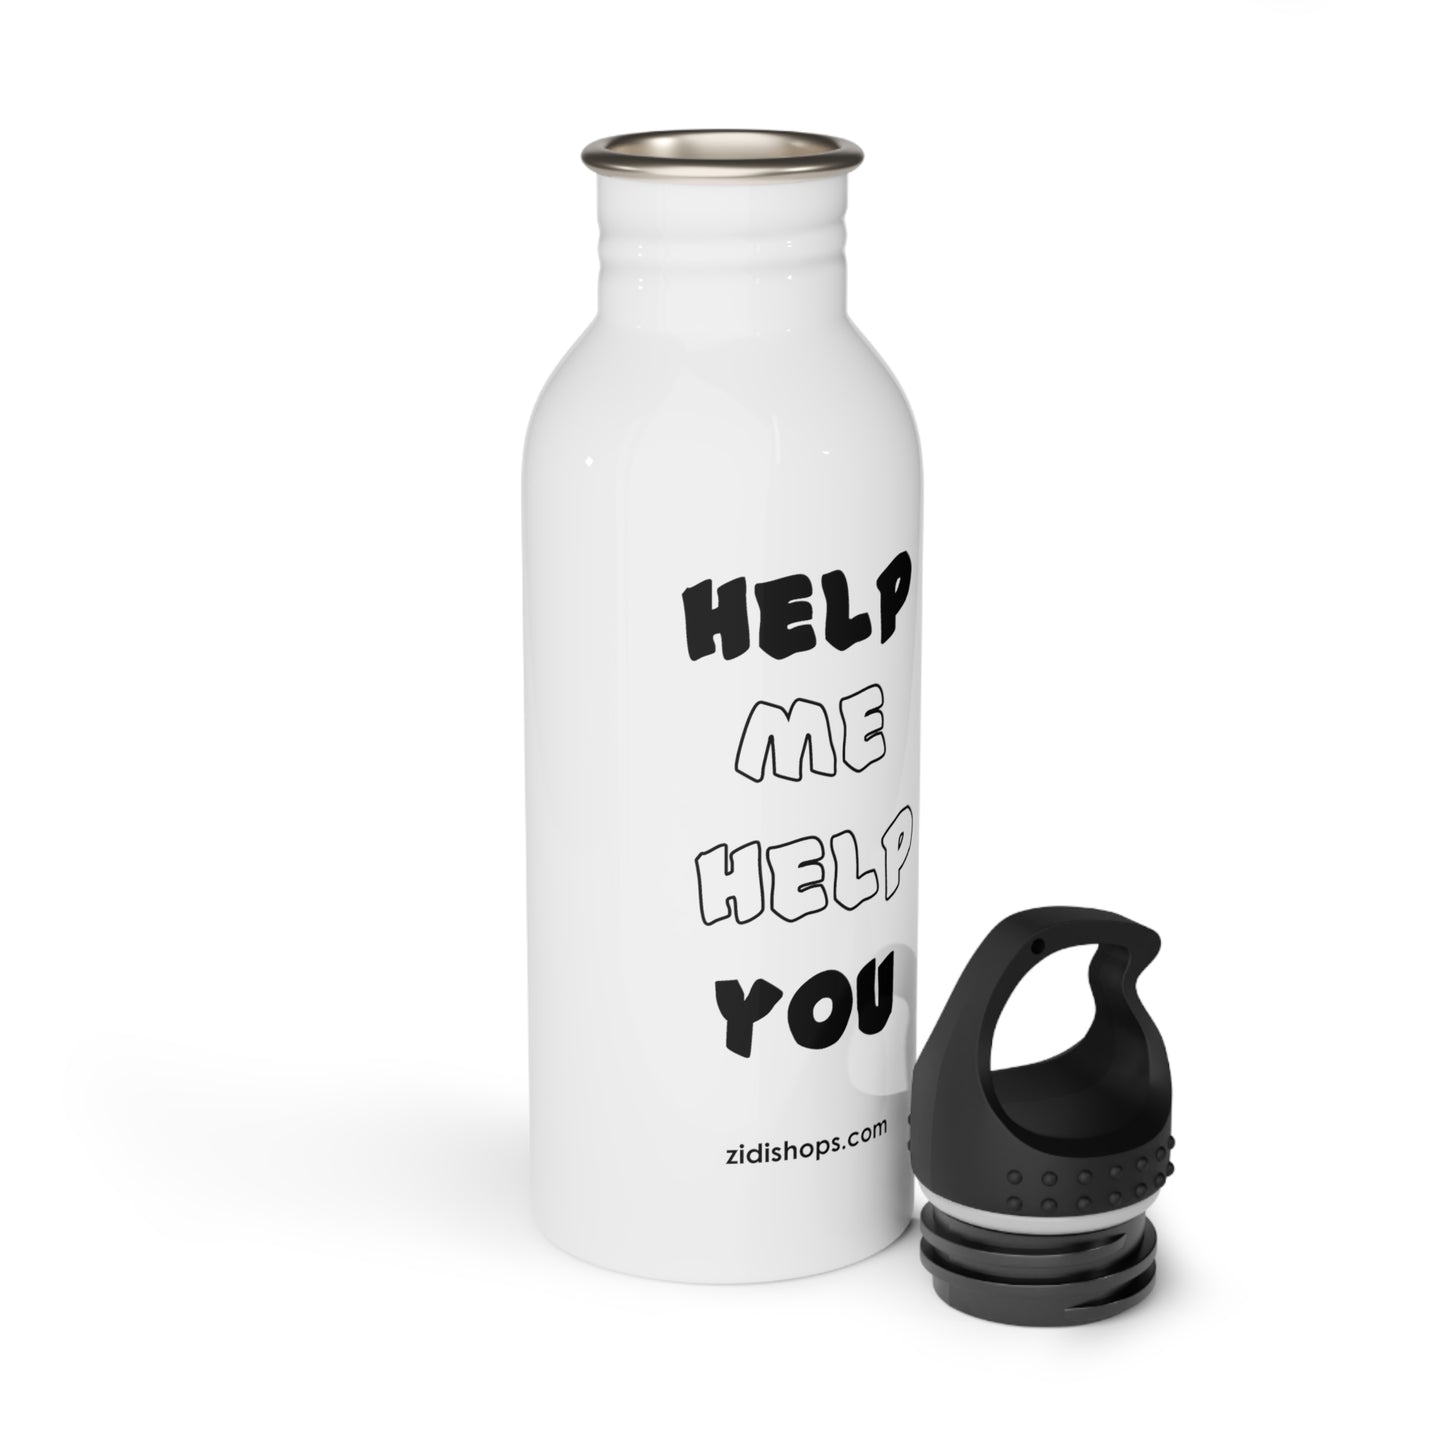 Help me Help you, Stainless Steel Water Bottle, Made with 18/8 food-grade stainless steel, wide neck for effortless sipping